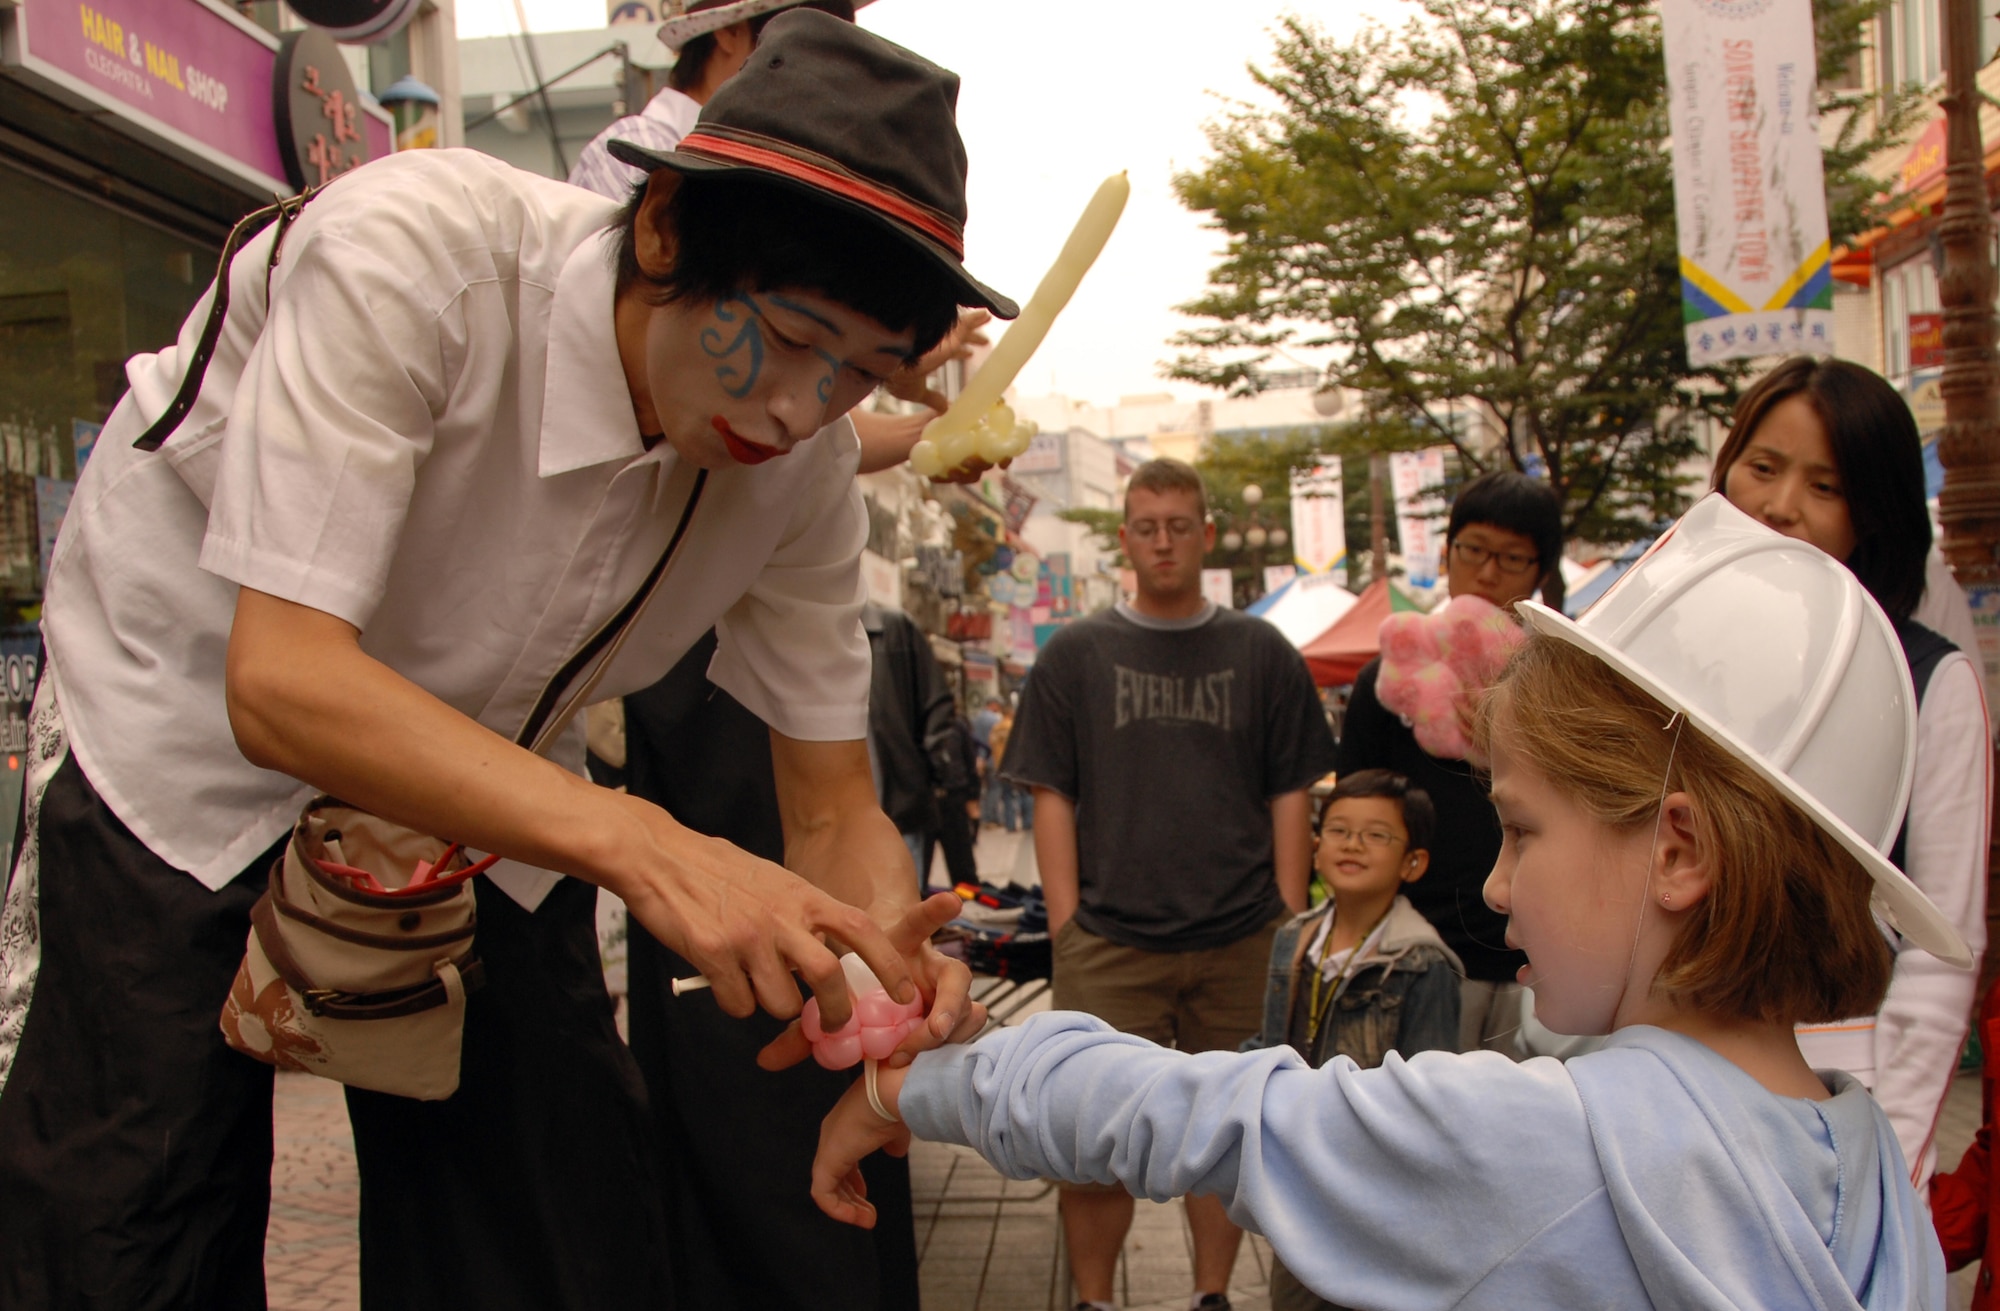 OSAN AIR BASE, Republic of Korea -- Sarah Wheeler, the 6-year-old daughter of 1Lt Richard Wheeler, 7AF, receives a balloon bracelet from a street performer during the Korean/American Friendship Festival on Oct. 15, 2007 (U.S. Air Force photo by Staff Sgt. Ronnie Hill) (Released)